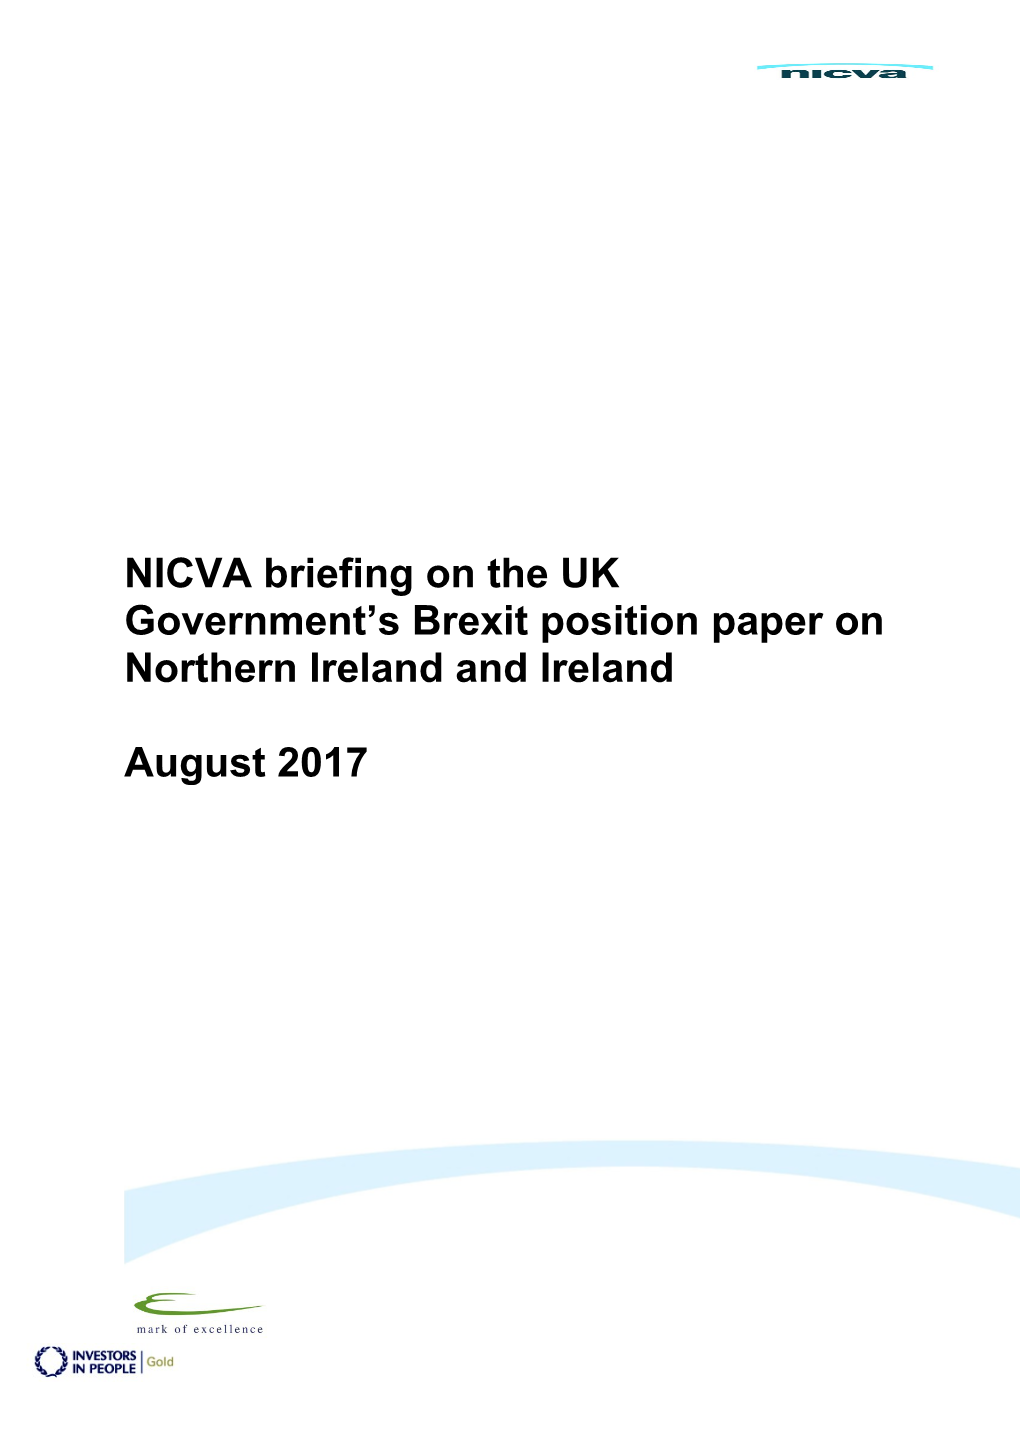 NICVA Briefing on the UK Government S Brexit Position Paper on Northern Ireland and Ireland